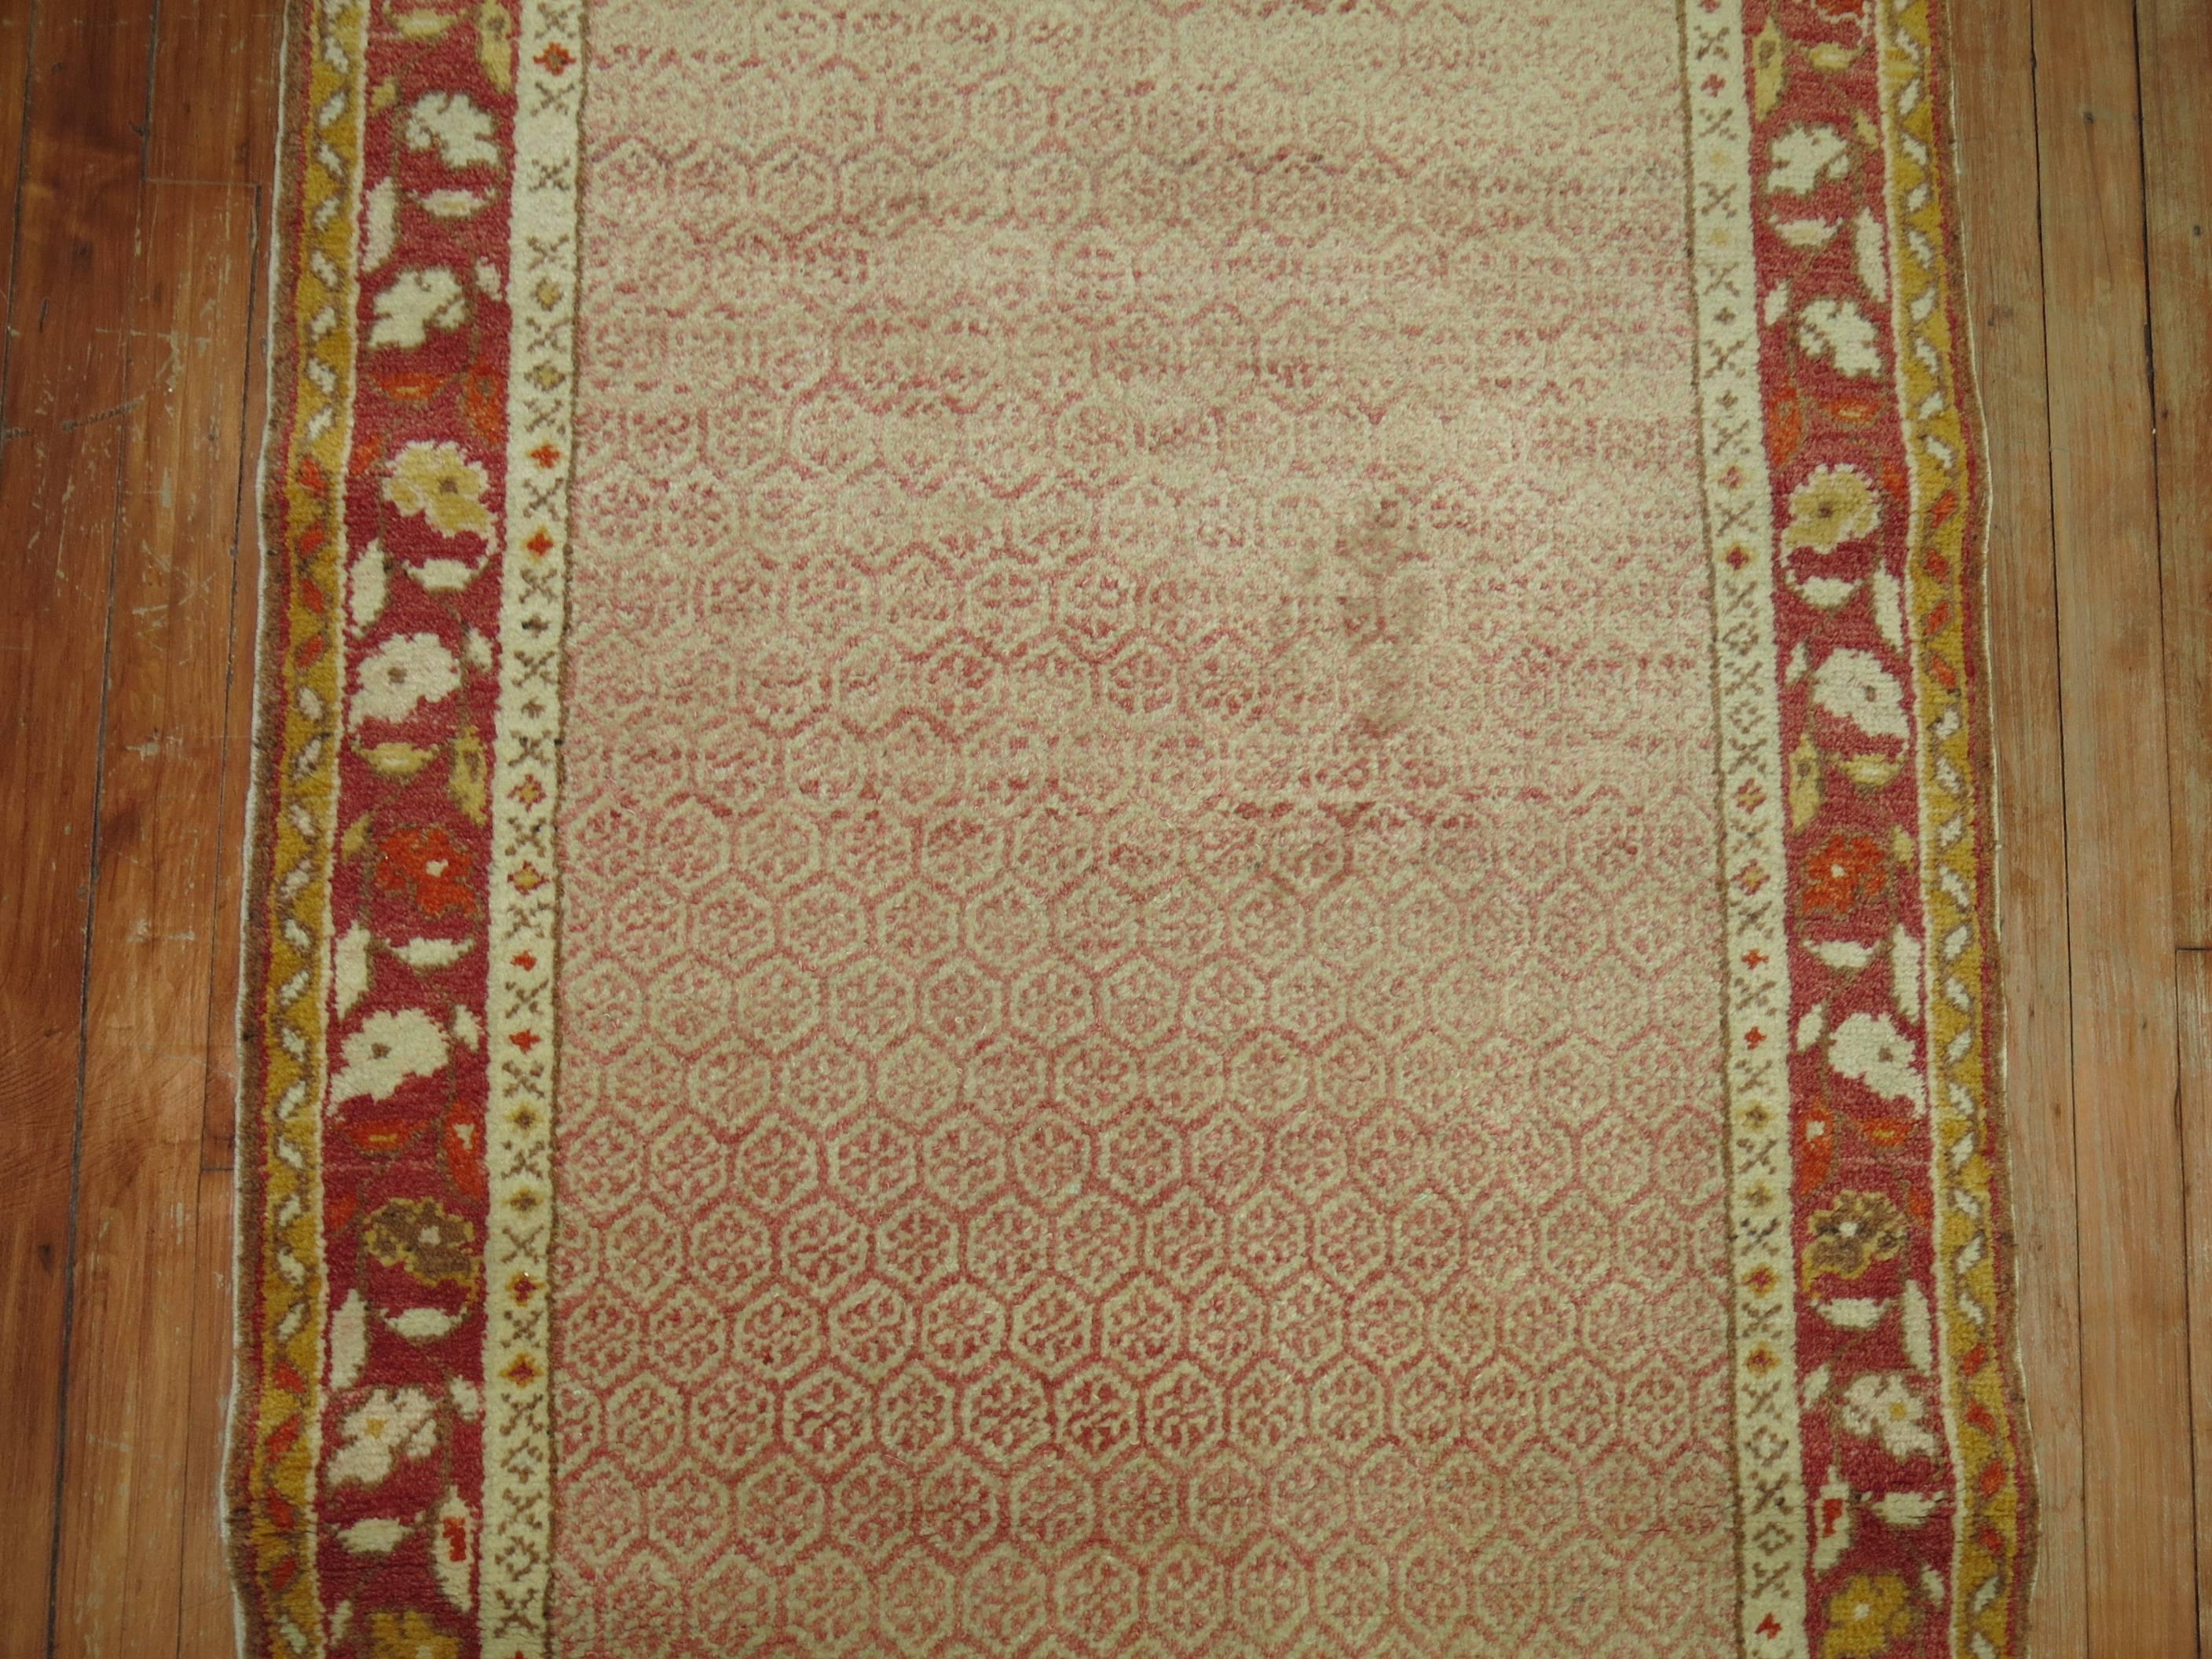 An early 20th century Turkish Oushak runner with a soft pink and cream field surrounded by a soft red border.

Measures: 2'10'' x 8'9''.